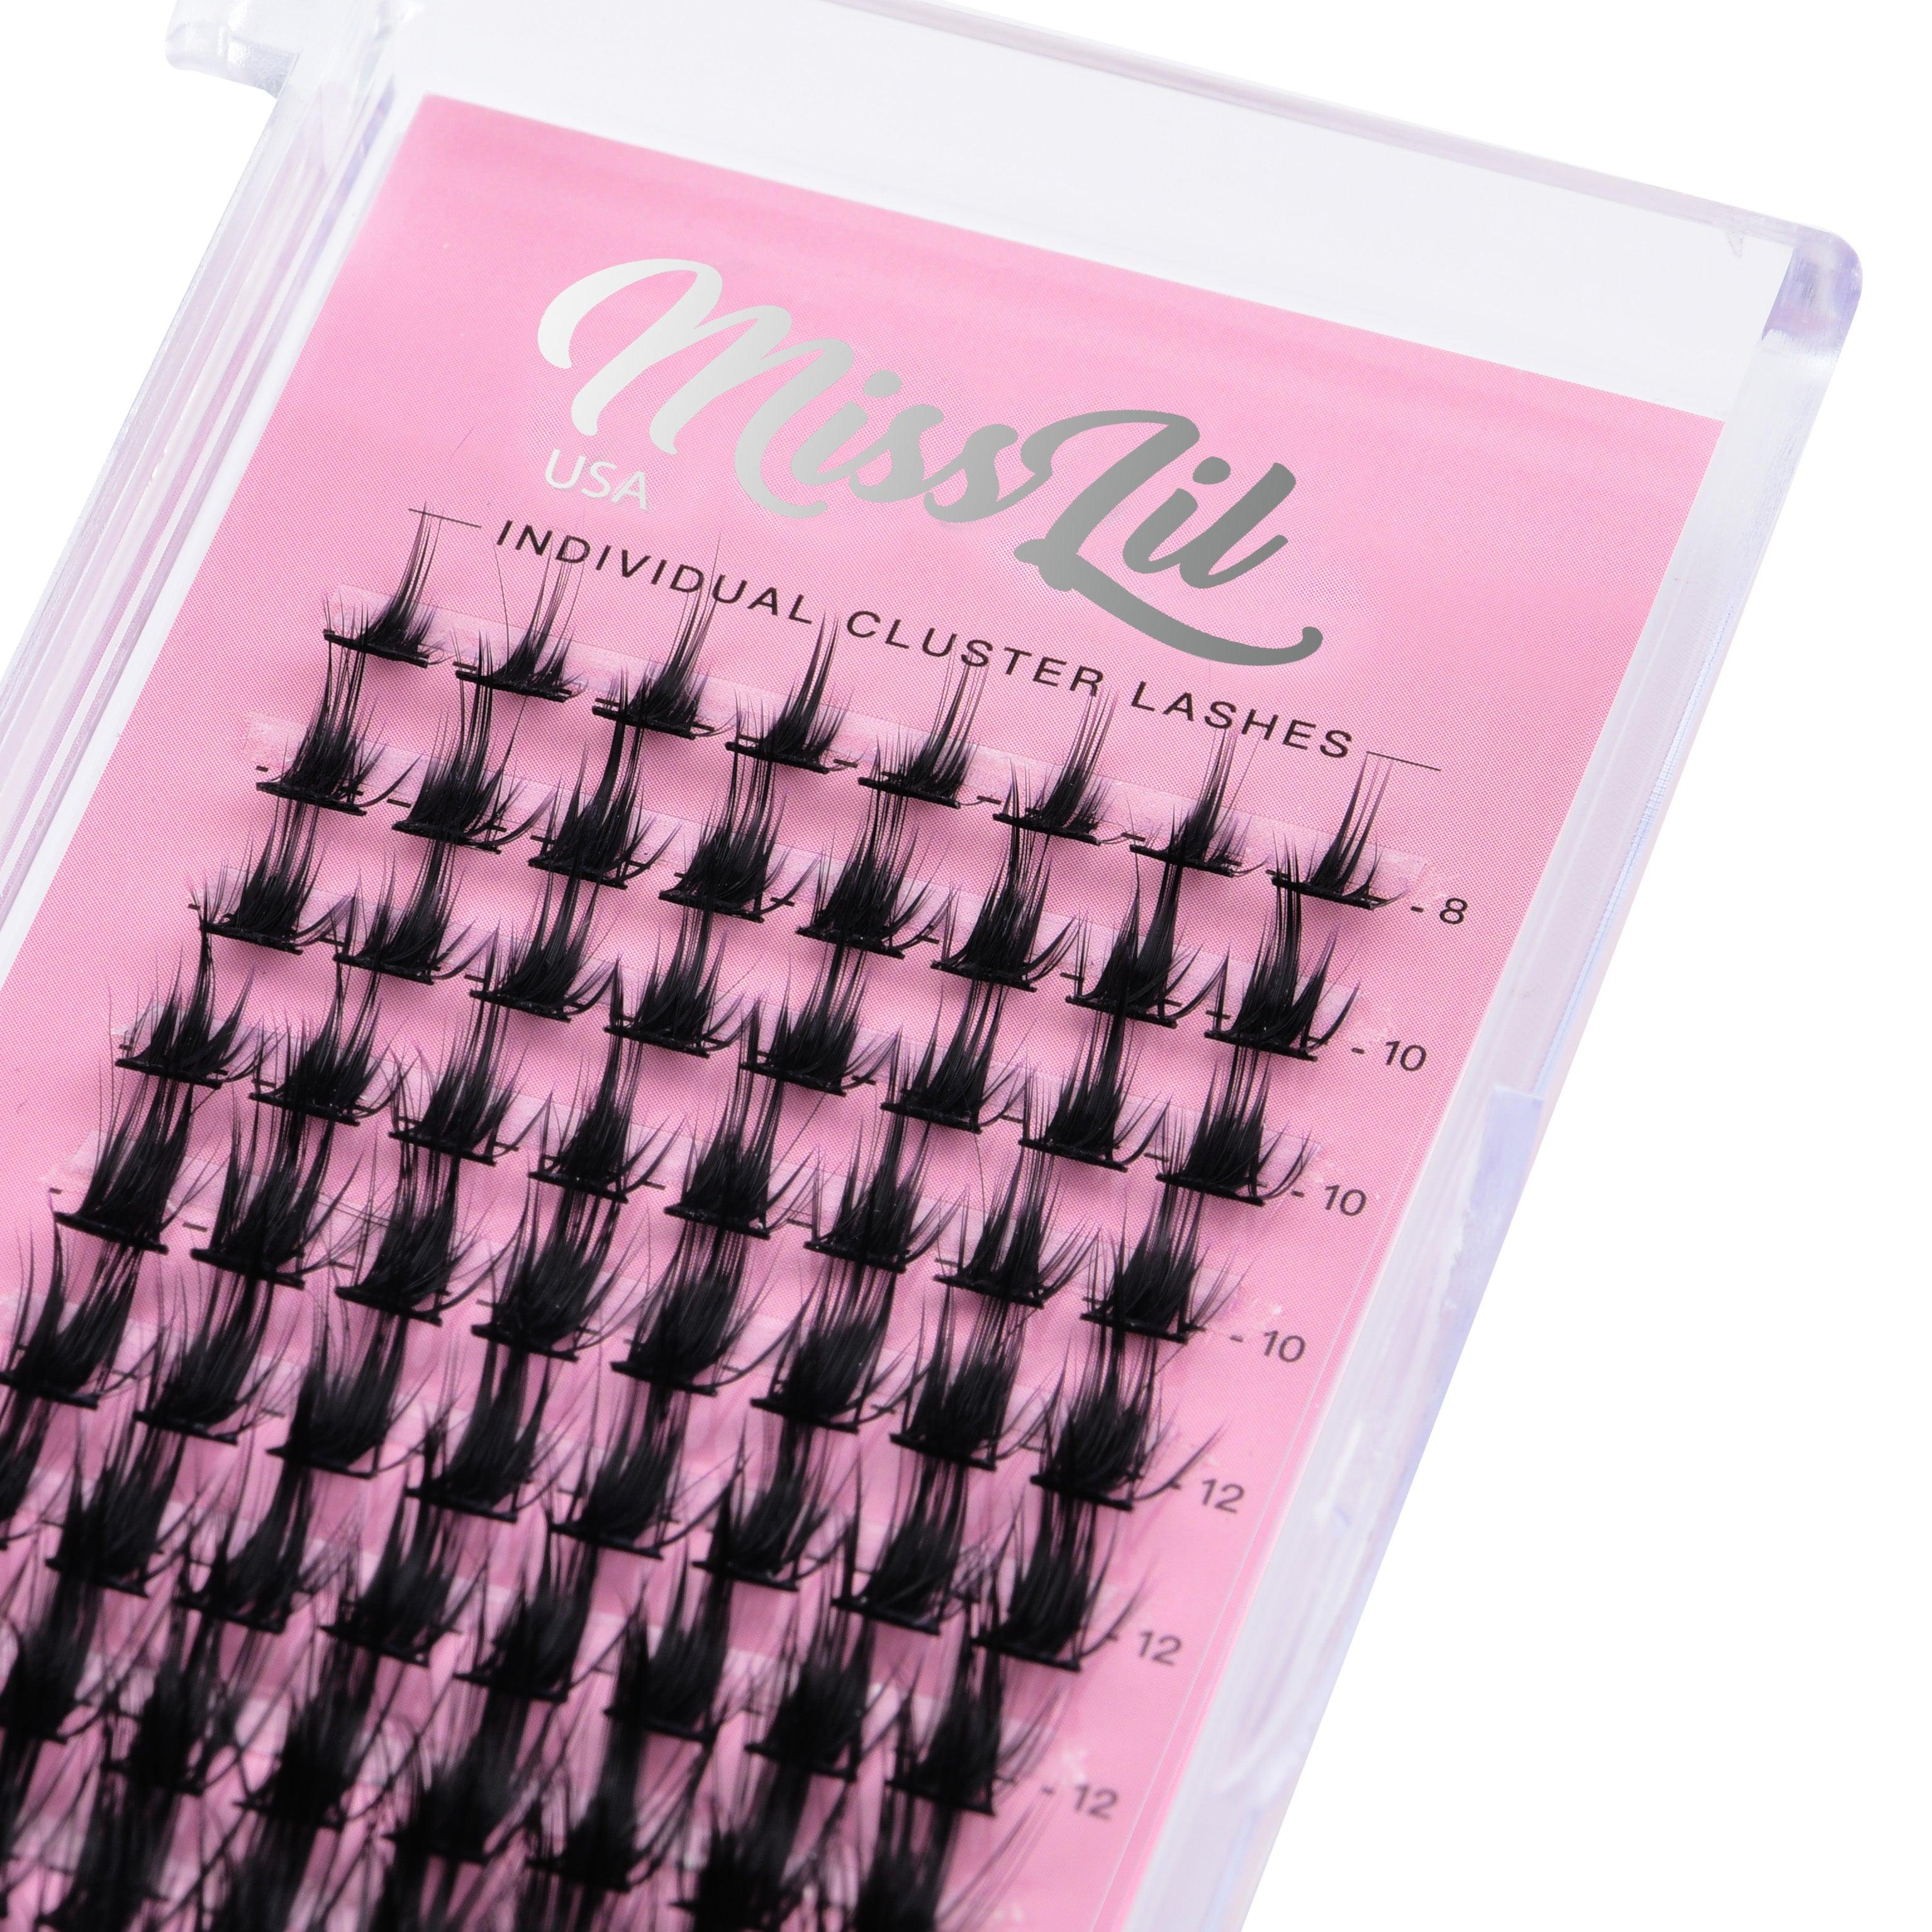  Individual Cluster Lashes AD-06 Small MIX Tray - Miss Lil USA